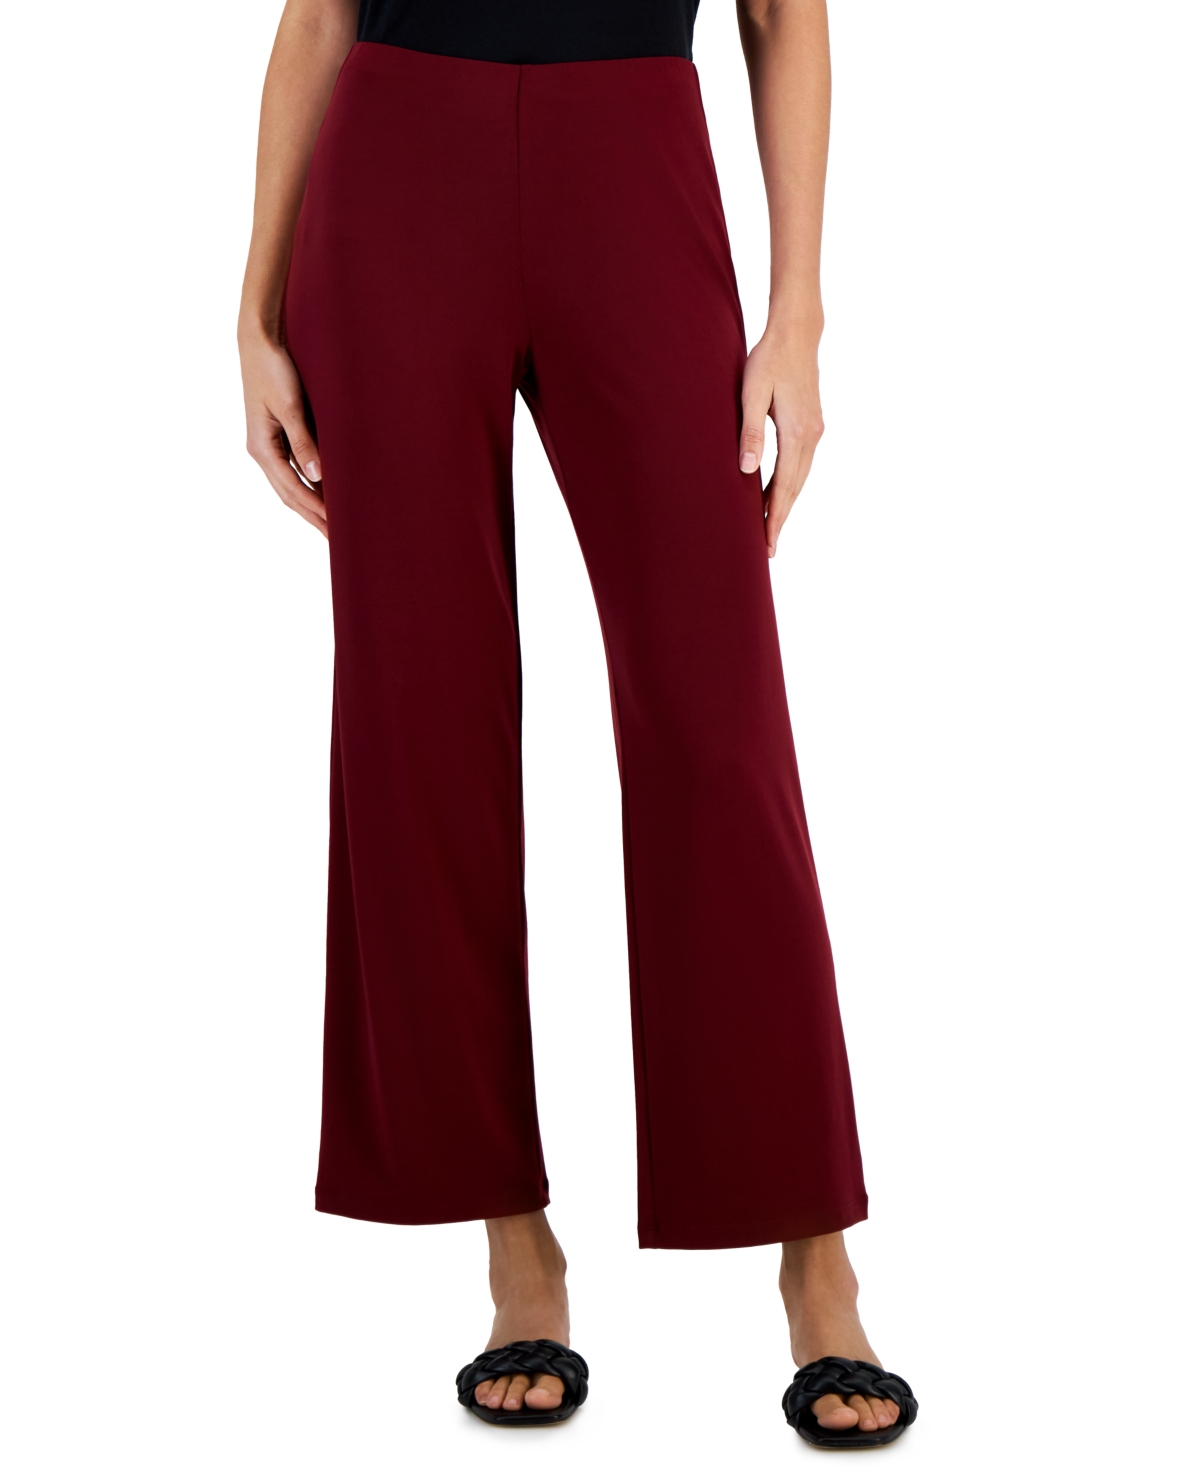 Jm Collection Women's Knit Wide-Leg Pull-On Pants, Created for Macy's